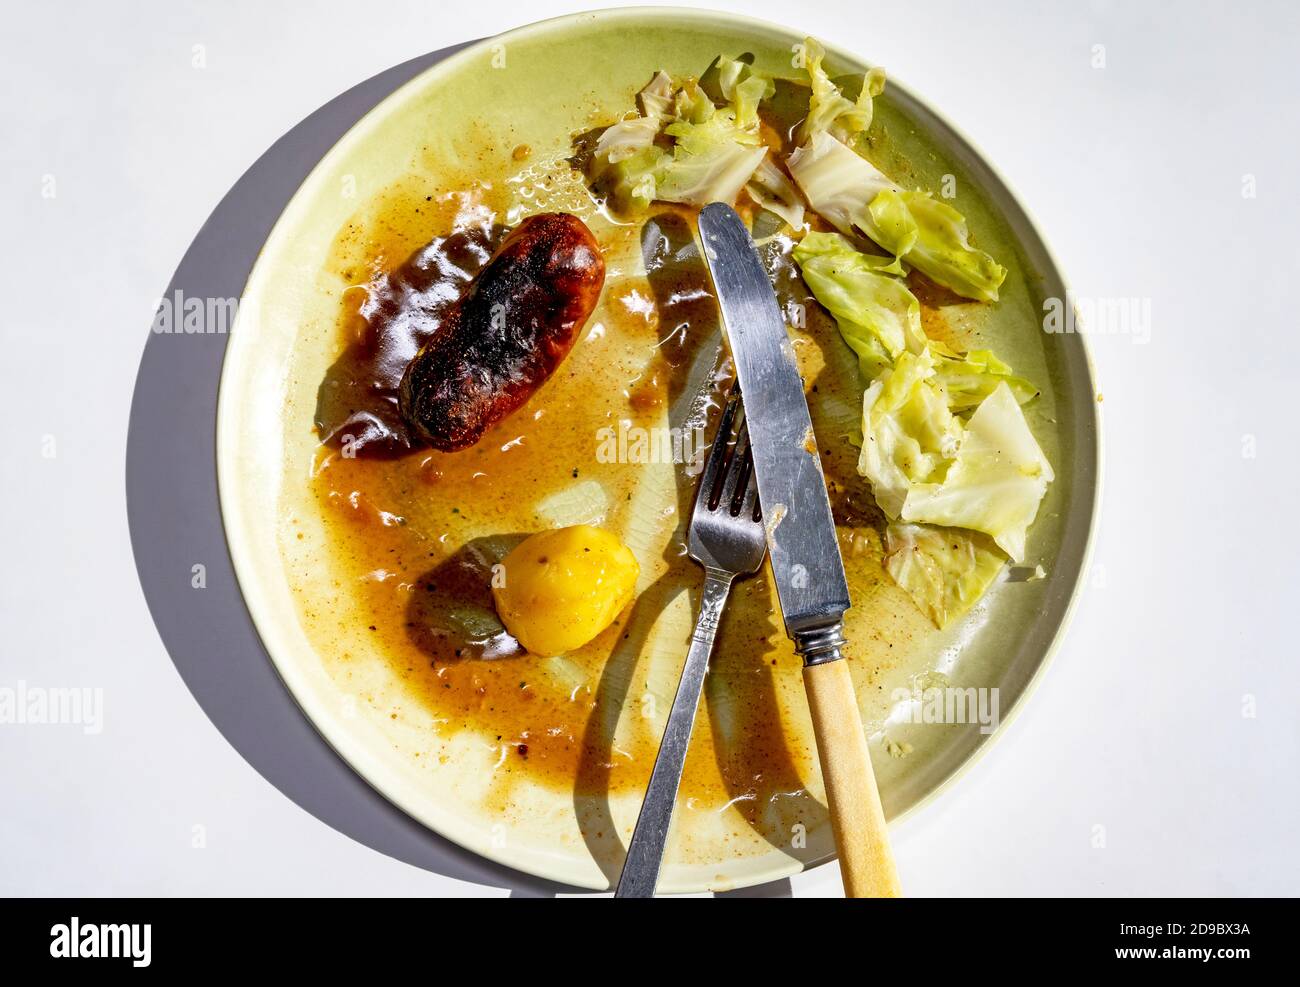 Partly uneaten meal Stock Photo